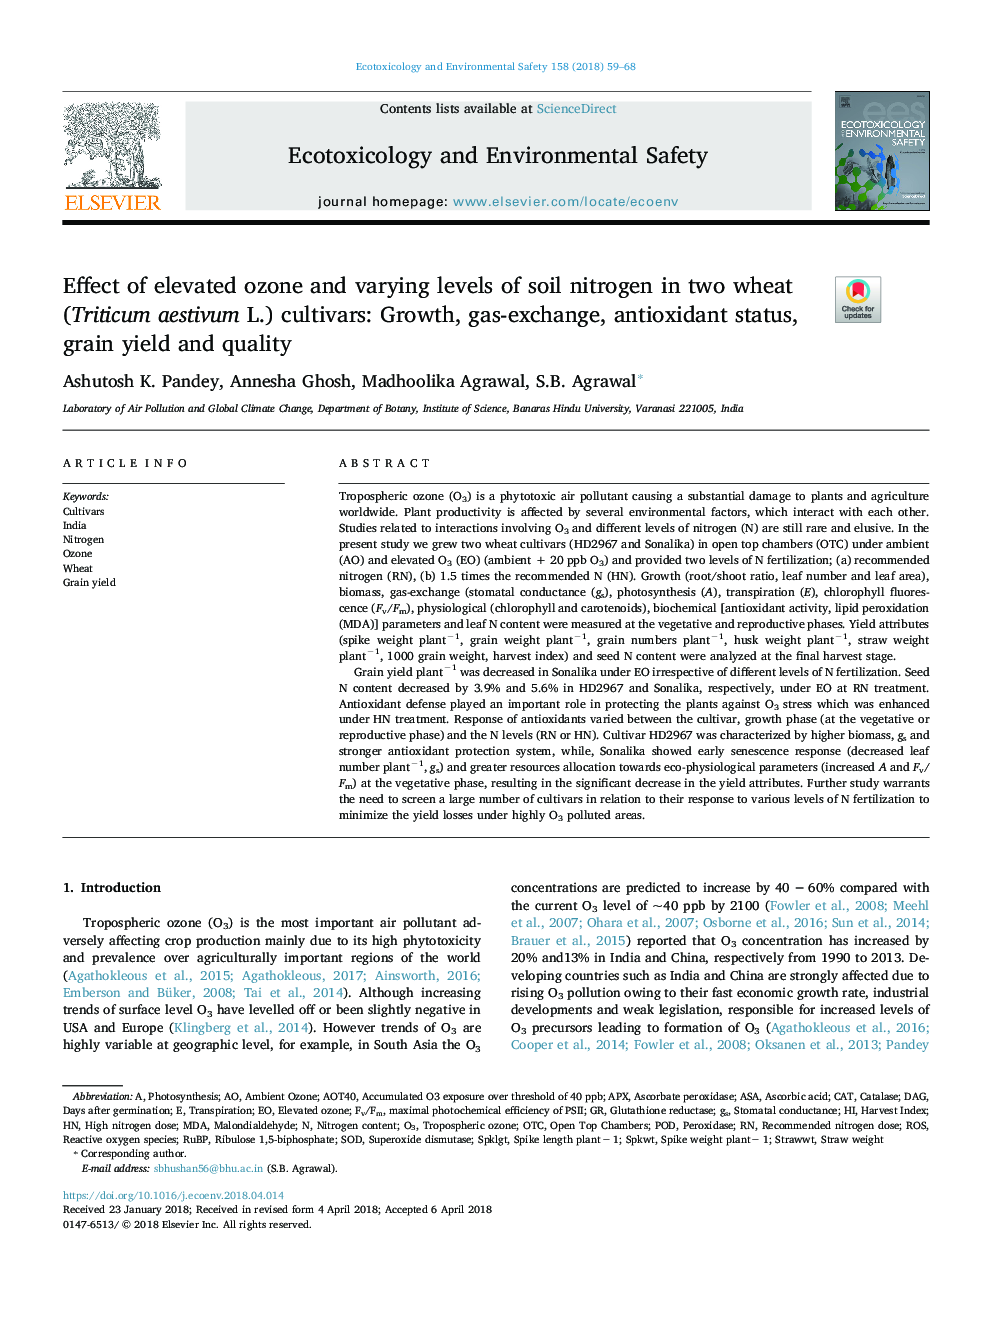 Effect of elevated ozone and varying levels of soil nitrogen in two wheat (Triticum aestivum L.) cultivars: Growth, gas-exchange, antioxidant status, grain yield and quality